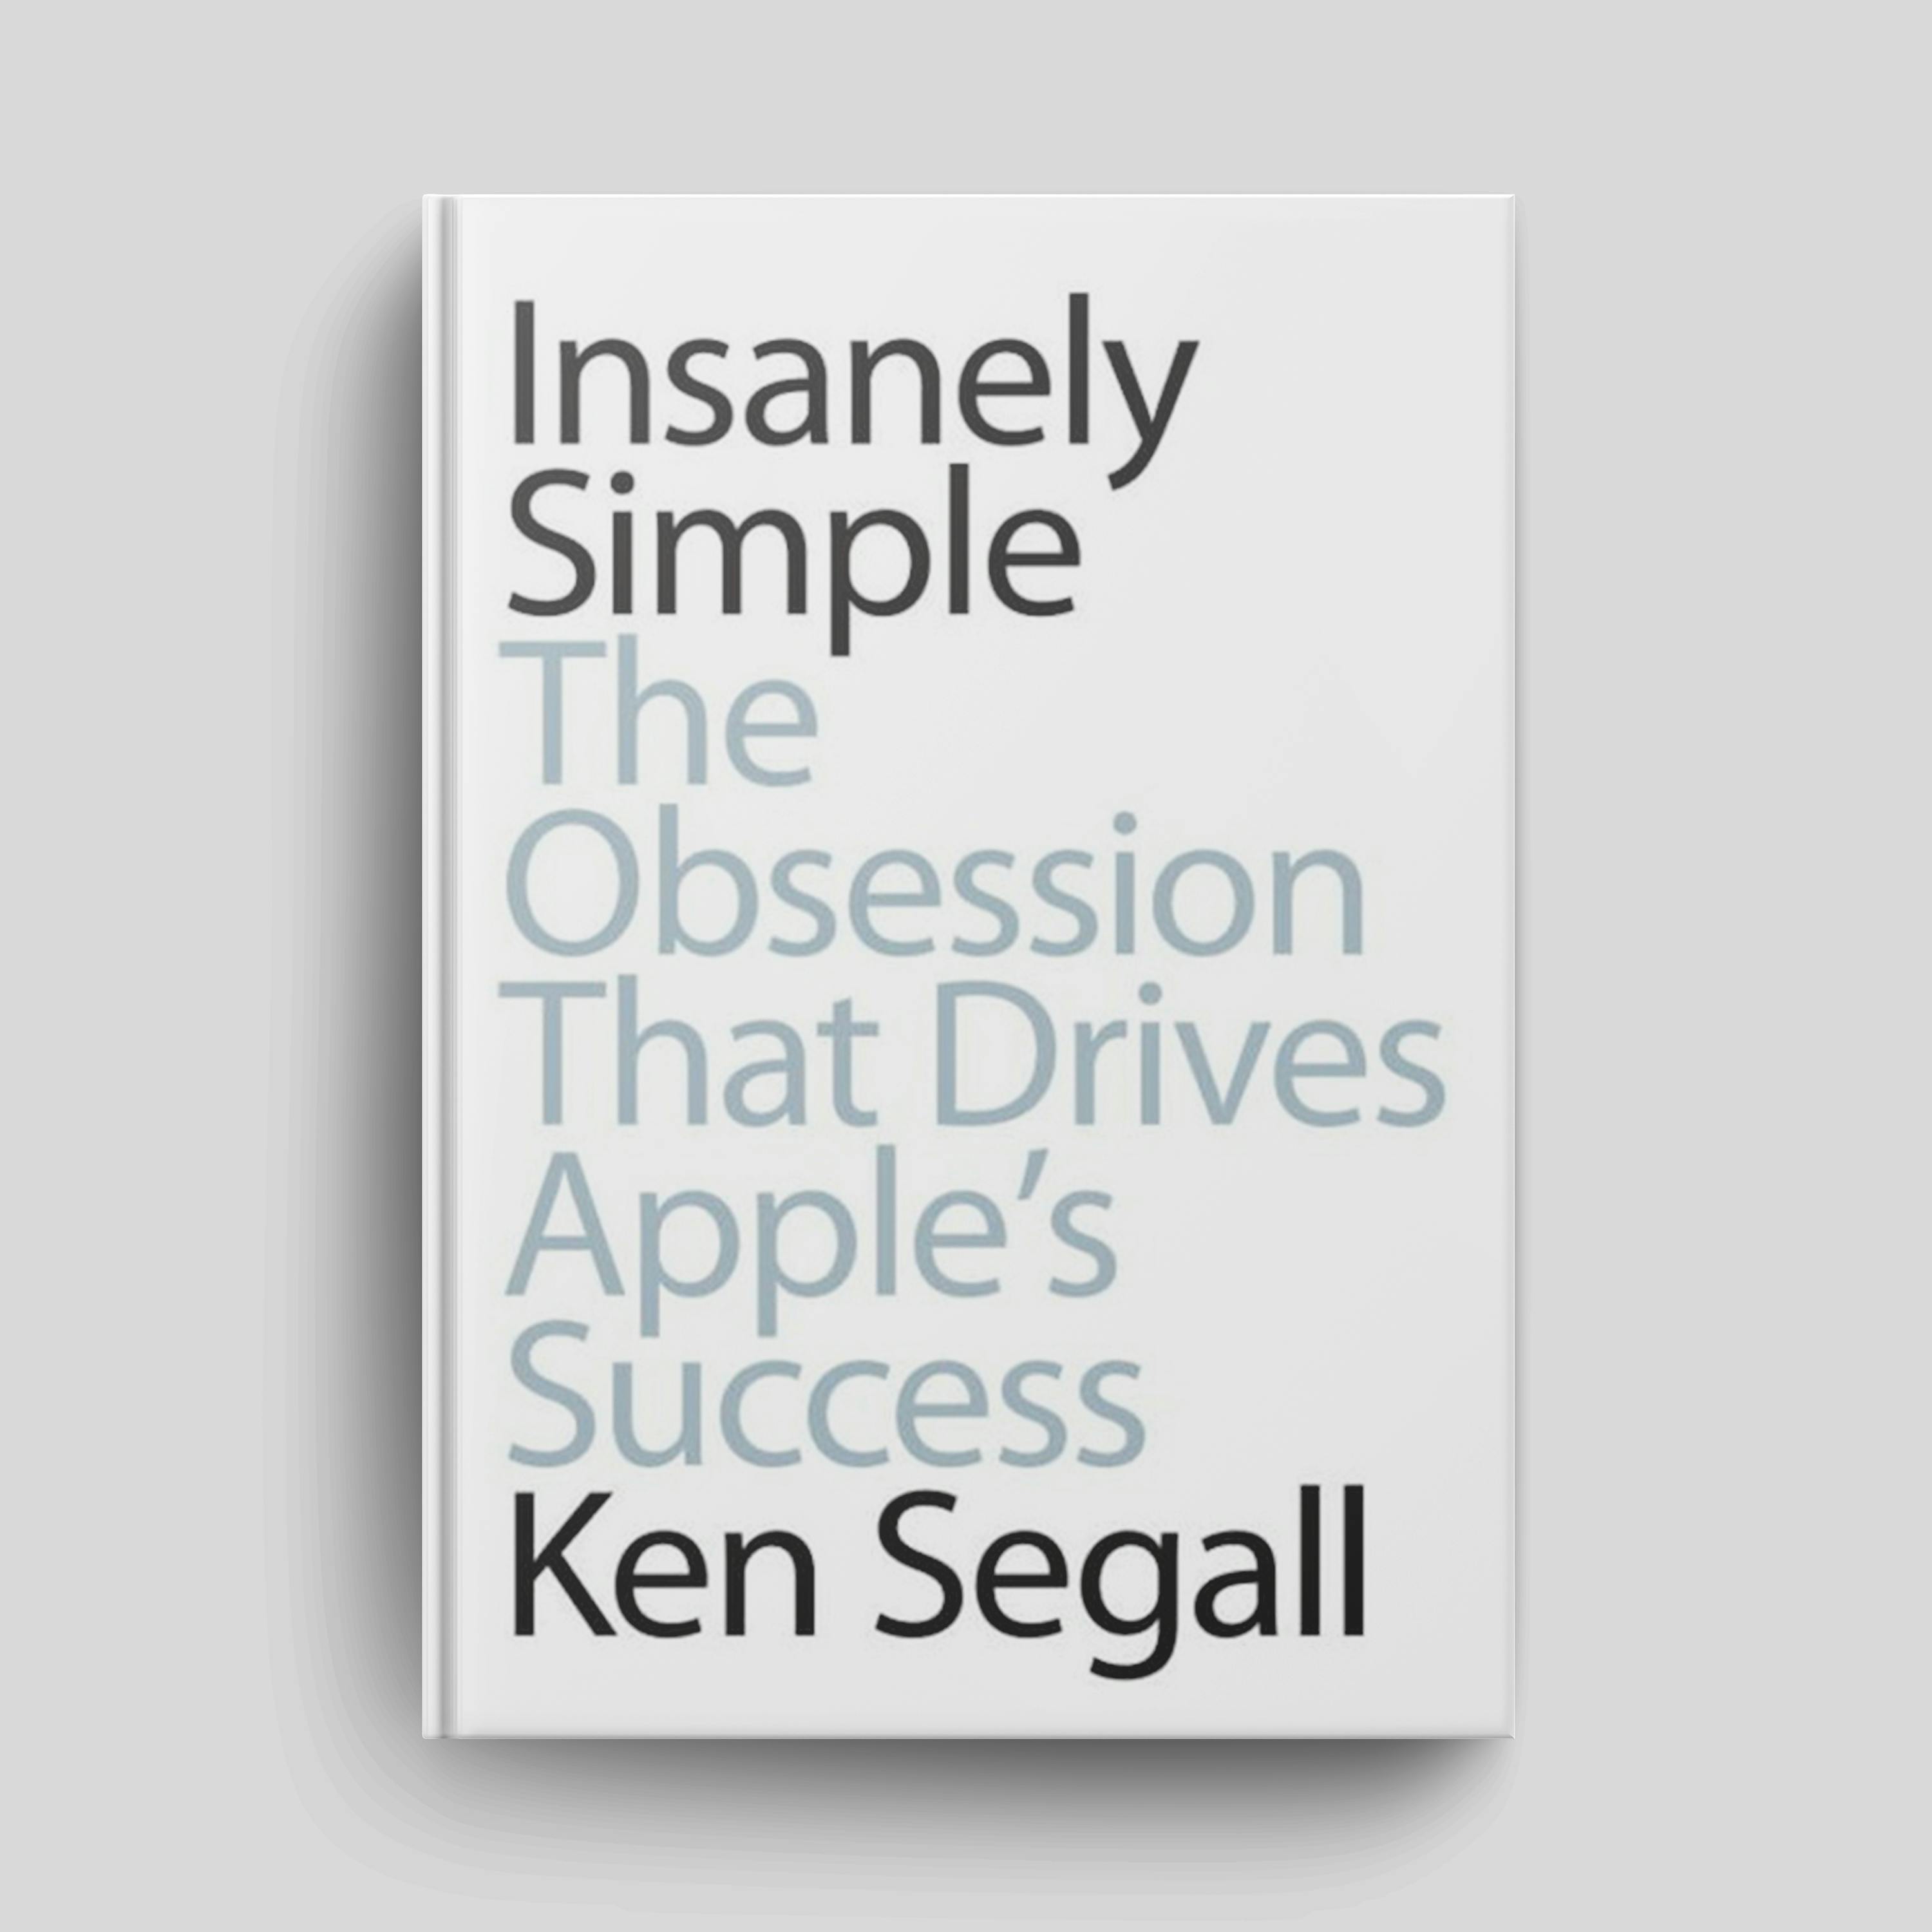 Book: (Part 1) "Insanely Simple: The Obsession That Drives Apple's Success" | Episode #174 (Part 1 of 2)